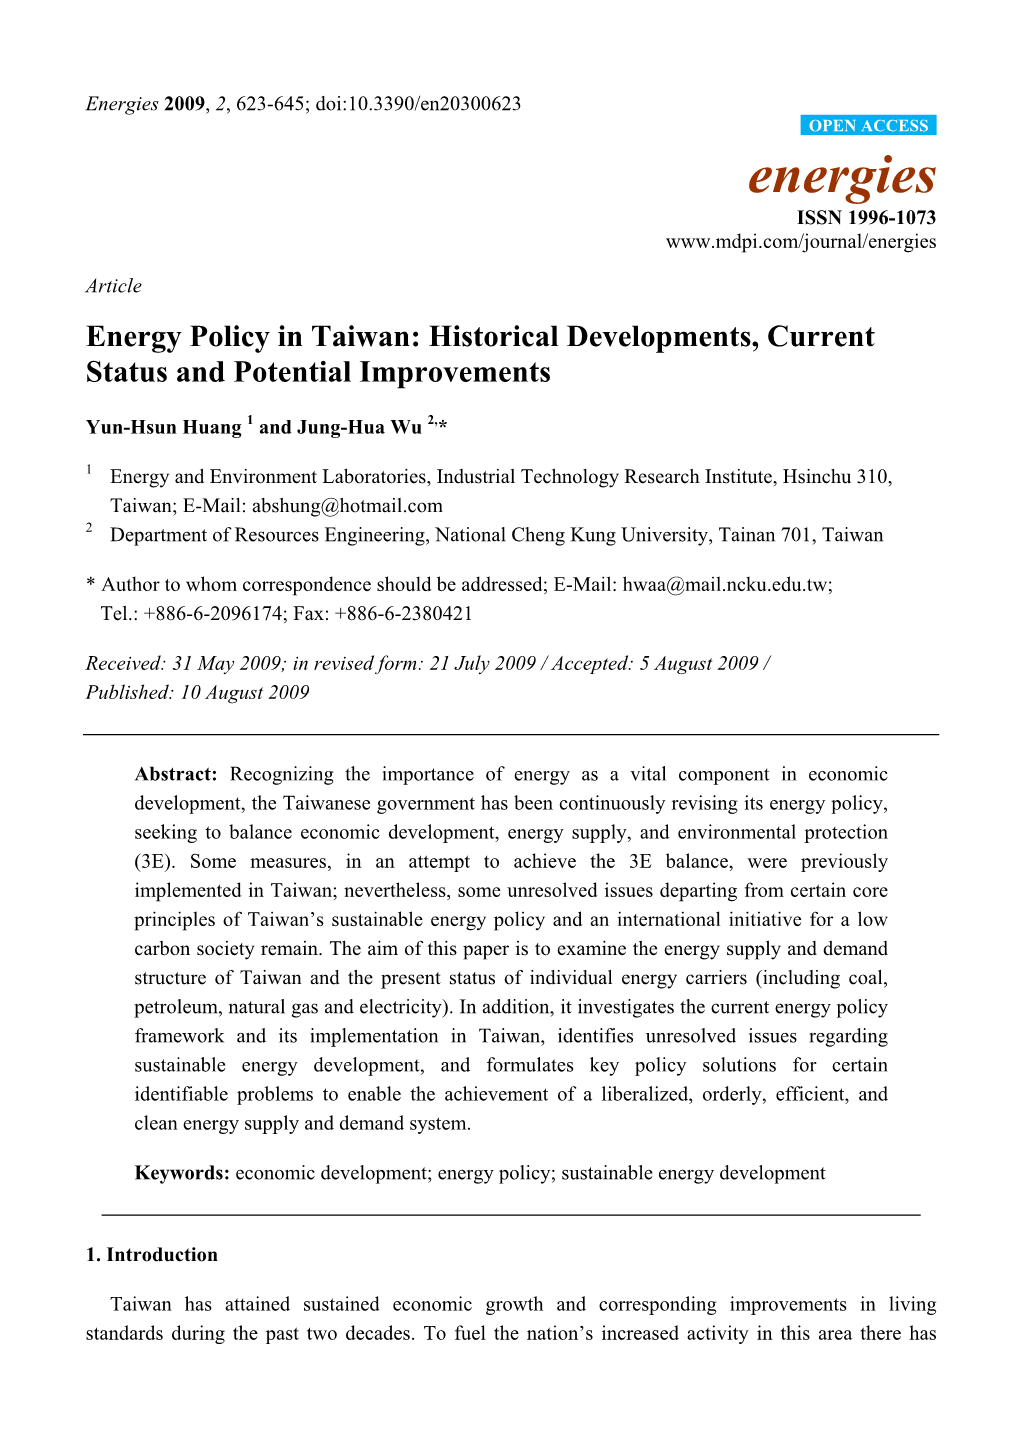 Energy Policy in Taiwan: Historical Developments, Current Status and Potential Improvements